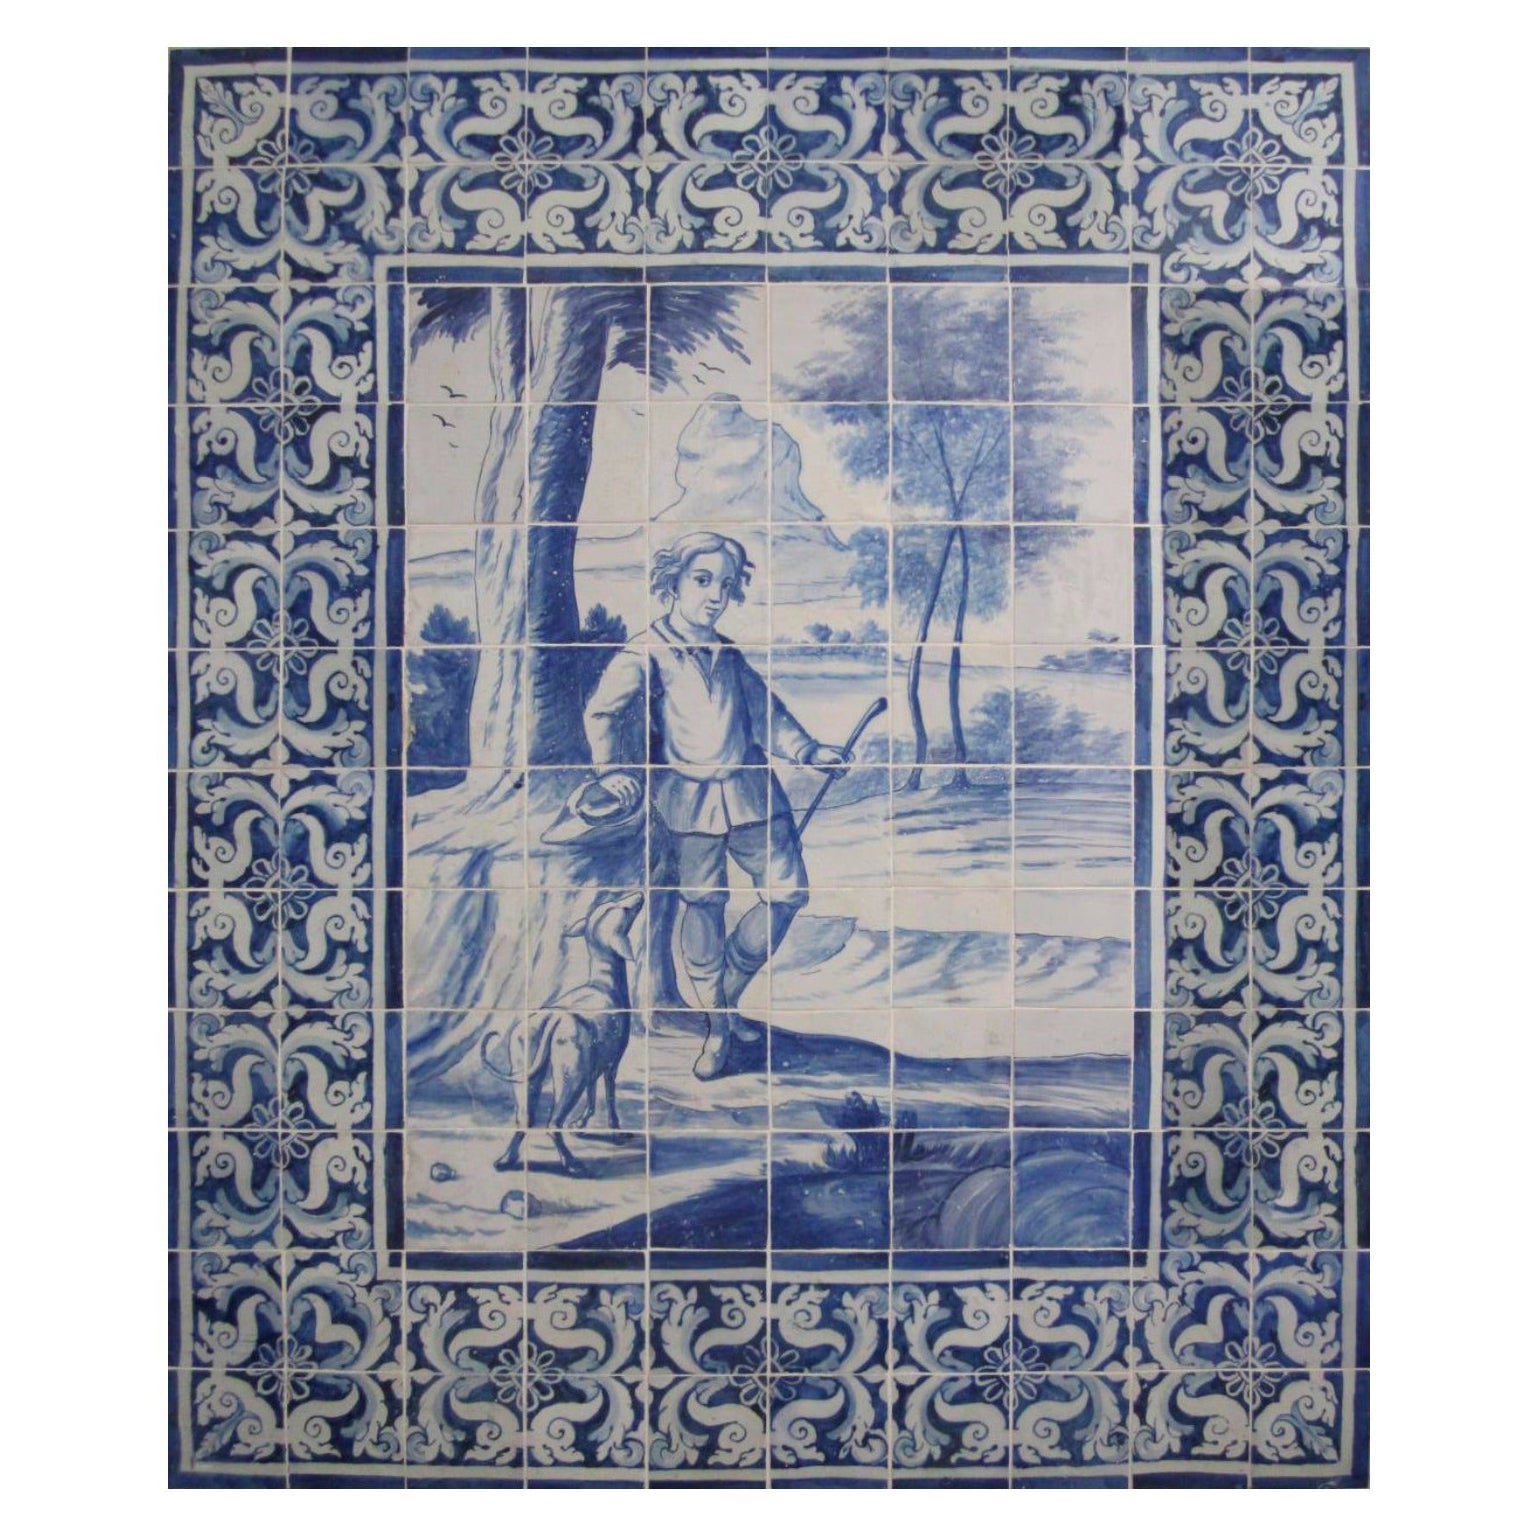 18th Century Portuguese " Azulejos " Panel "The Boy and the Dog" For Sale